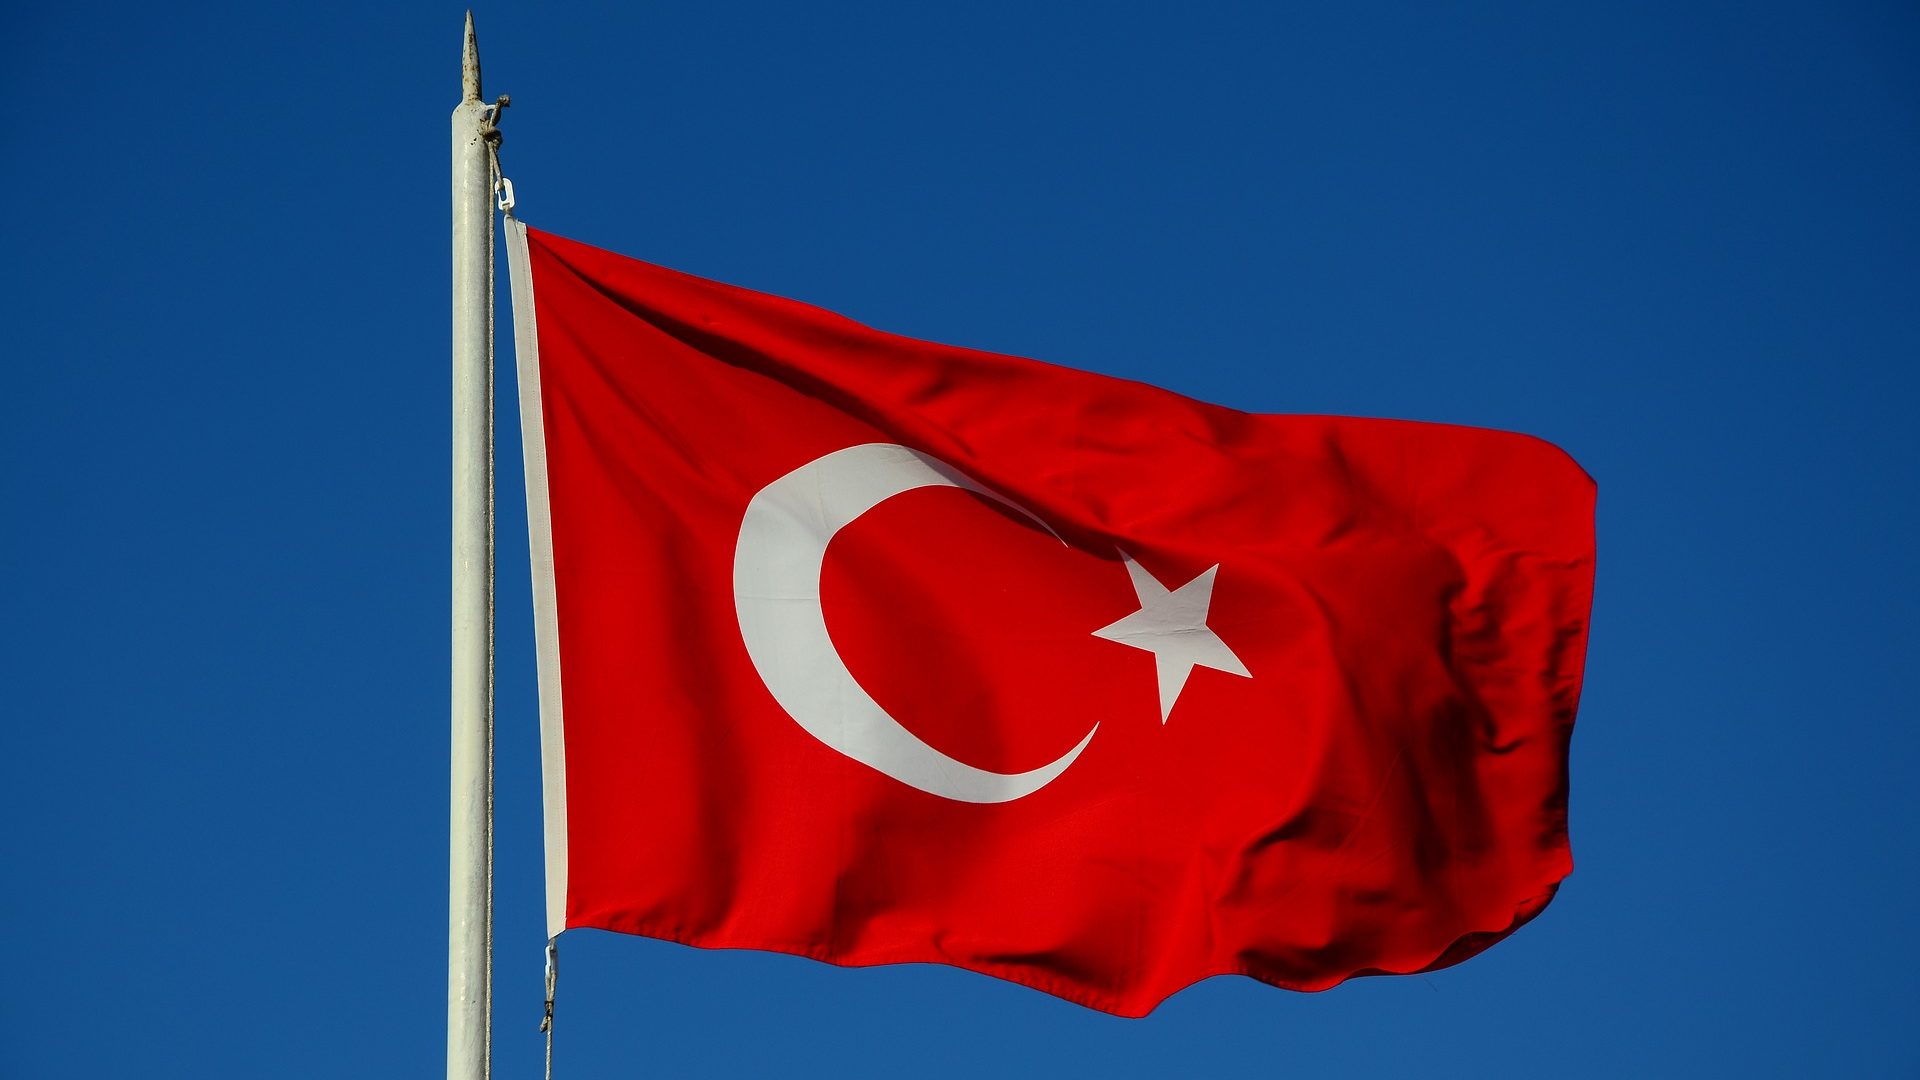 Turkish Outrage Over the Flag Incident in Libya